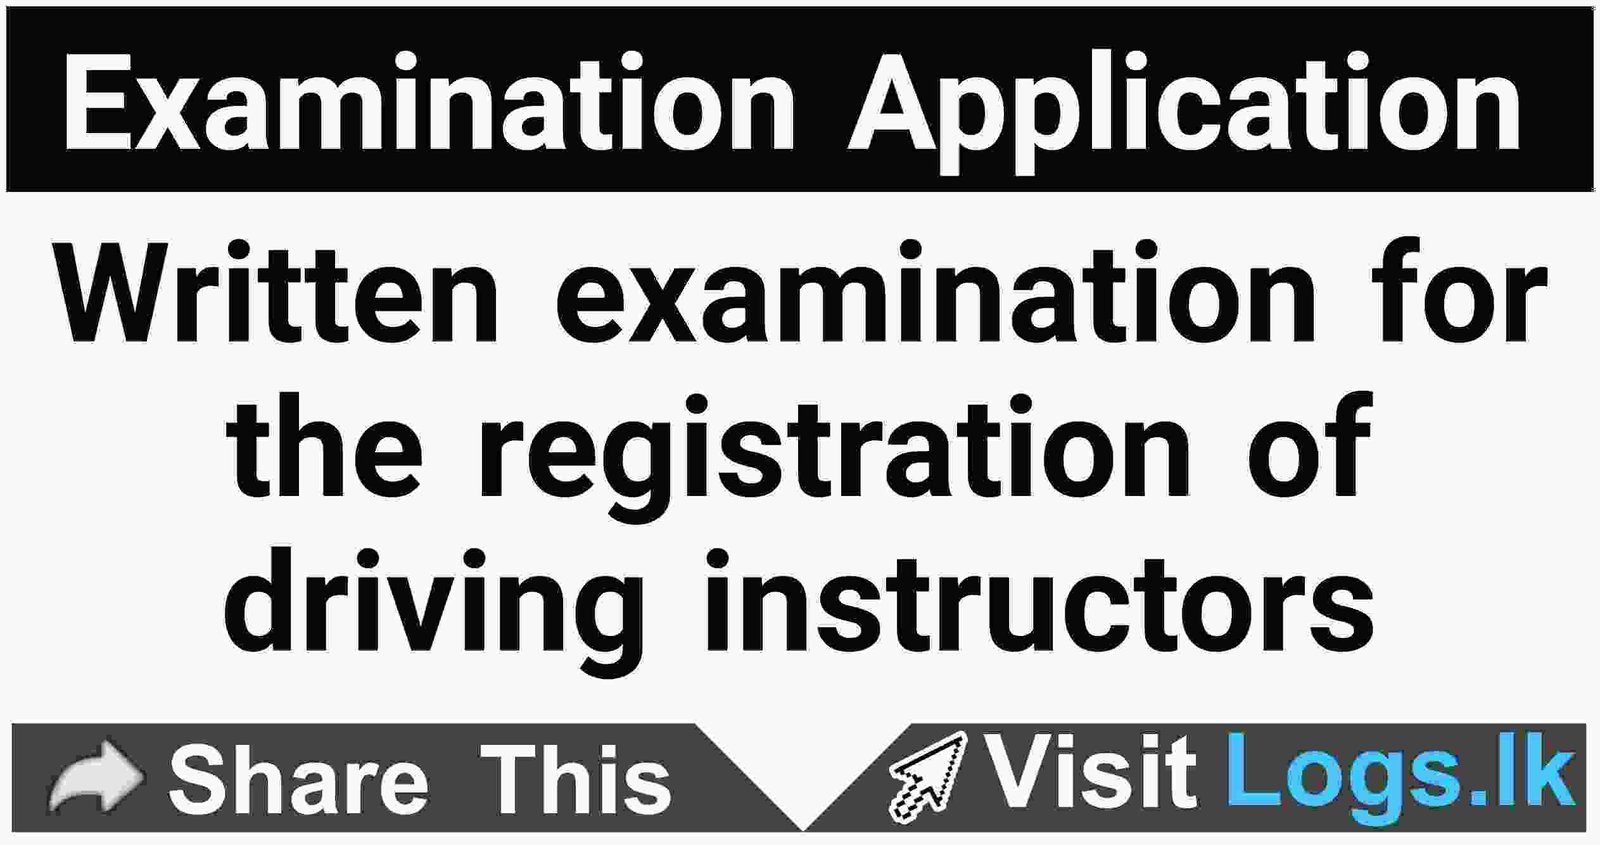 Written examination for the registration of driving instructors - 2022